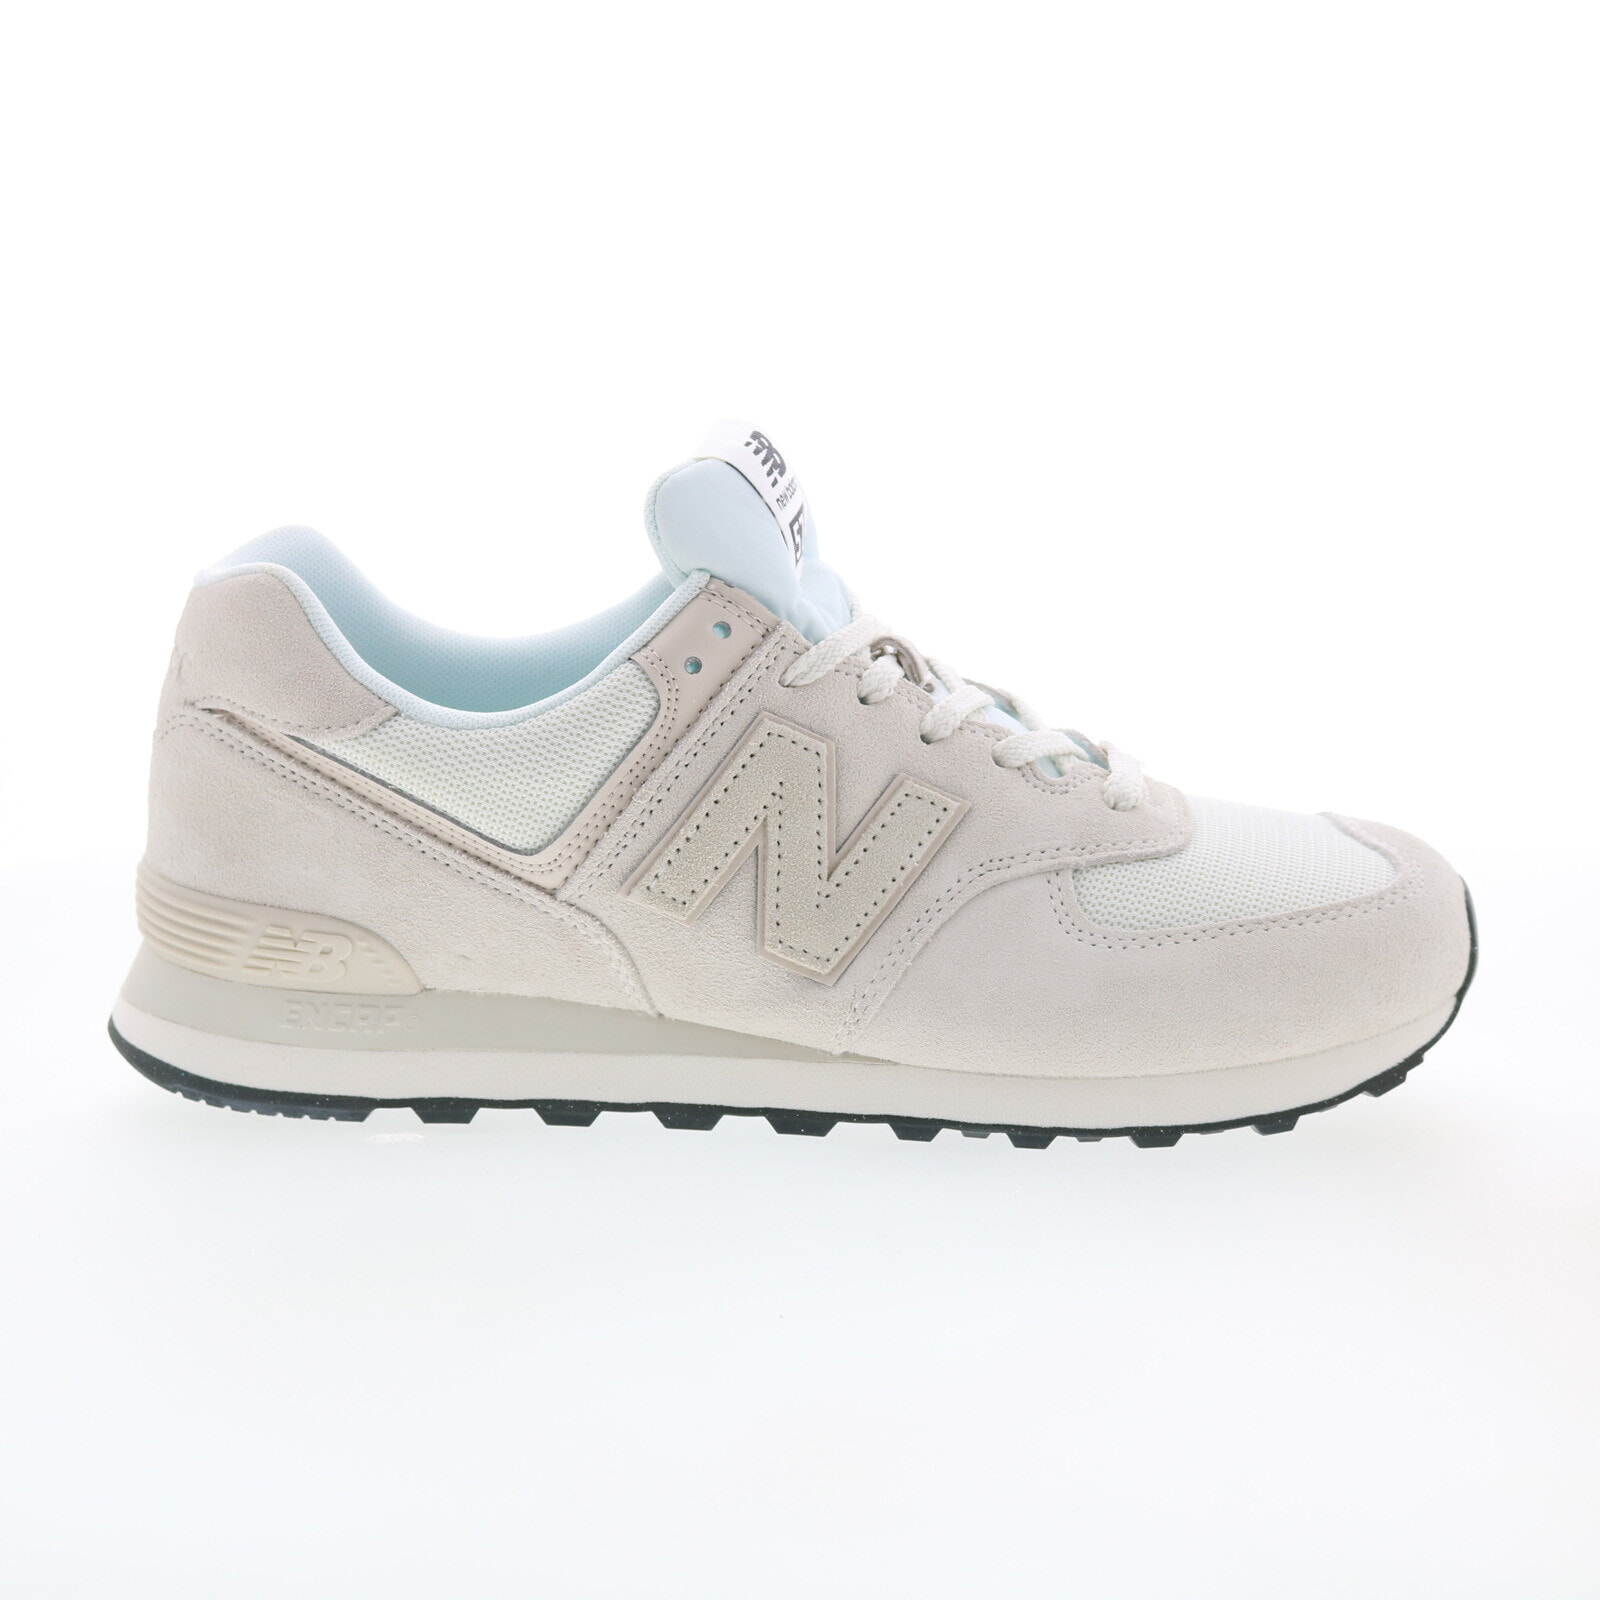 New Balance 574 U574OF2 Mens Beige Suede Lace Up Lifestyle Sneakers Shoes